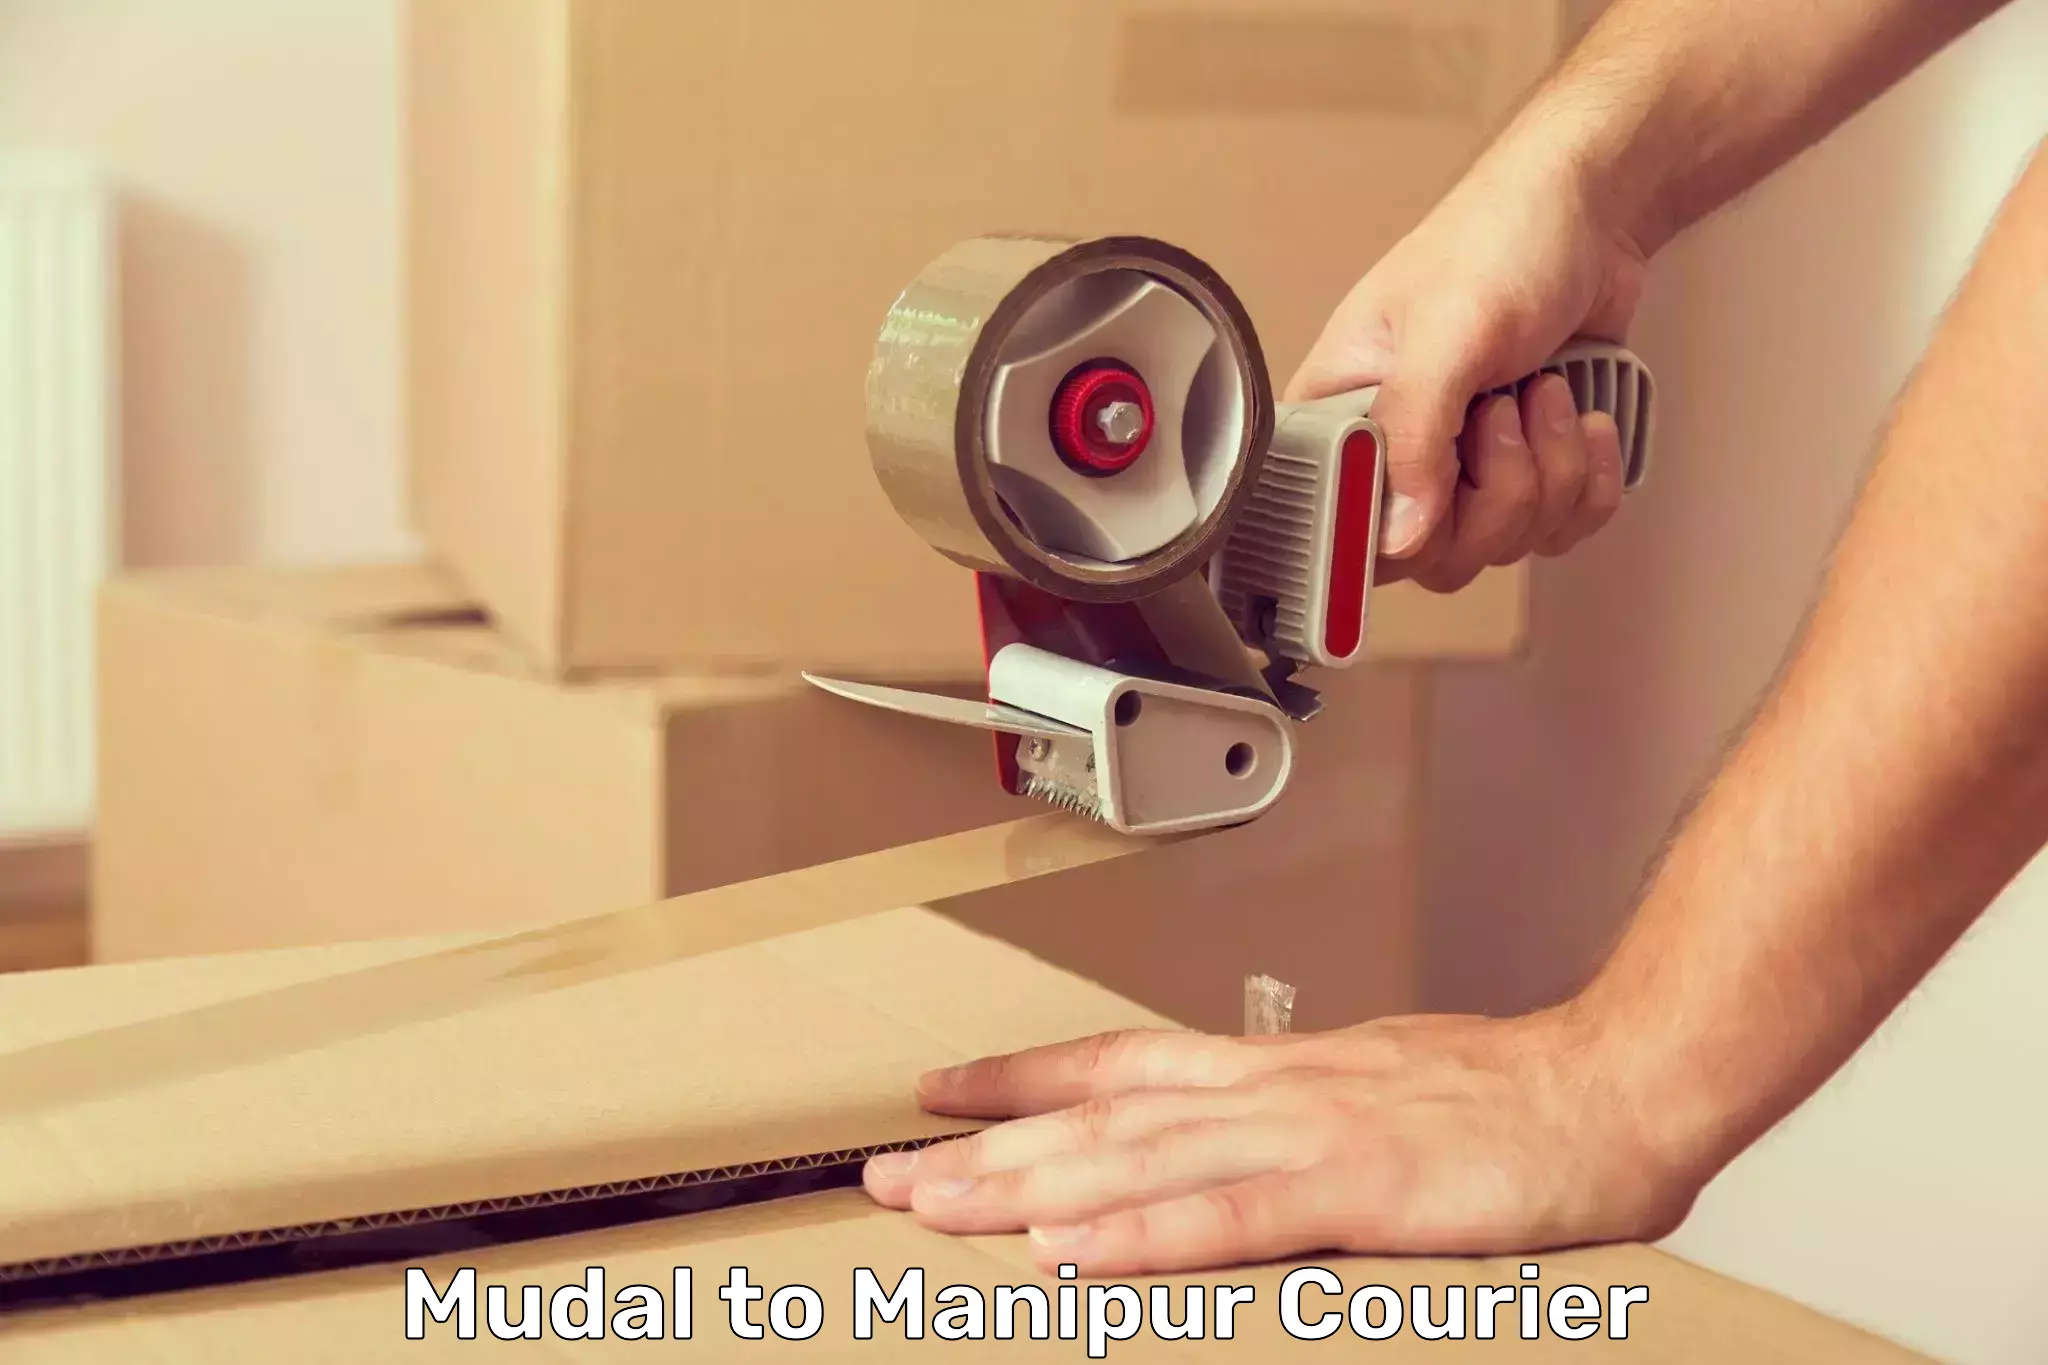 Courier service innovation Mudal to Manipur